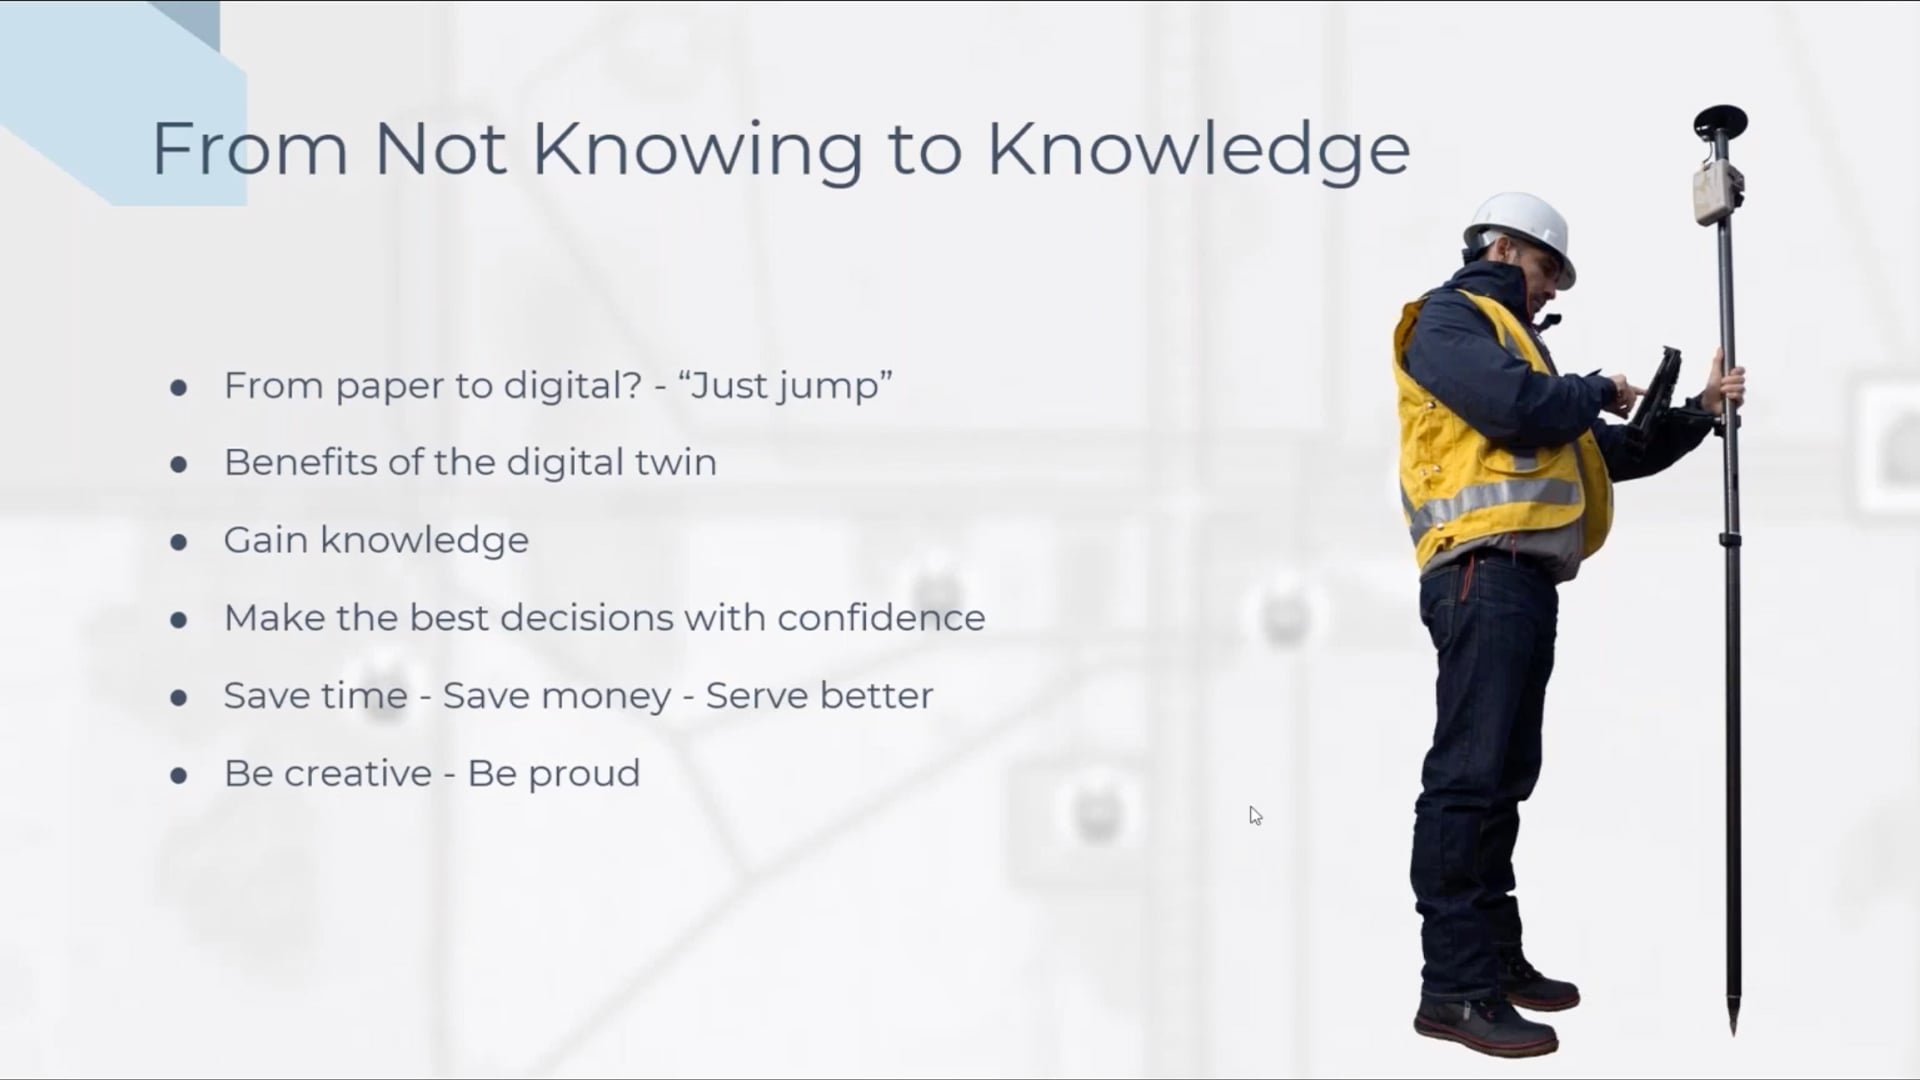 Jean-Yves Lauture's slide titled "From Not Knowing to Knowledge" explains the benefits of going paper to digital (more knoweldge, better decision making, less time and less money). To the right, an image of a fieldworker collecting data with an Eos Arrow Gold on a rangepole is shown.